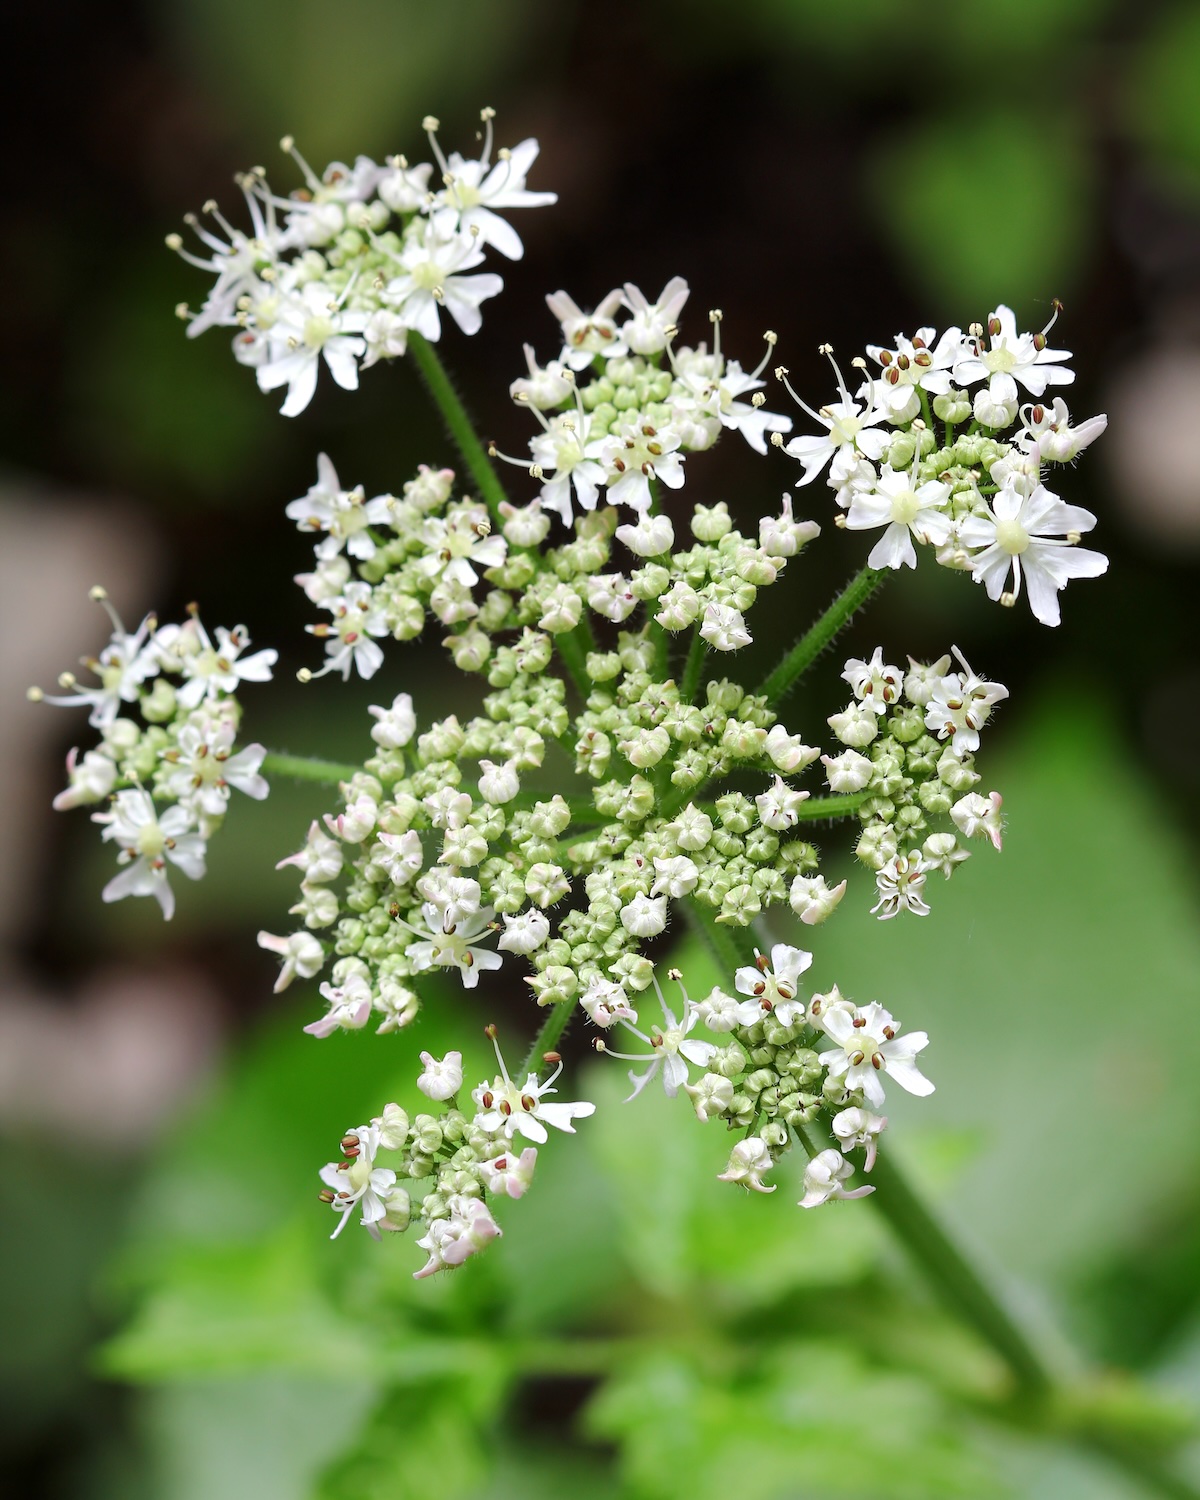 Closeup of home grown Caraway plant with white flowers showing pollens during summer in Europe